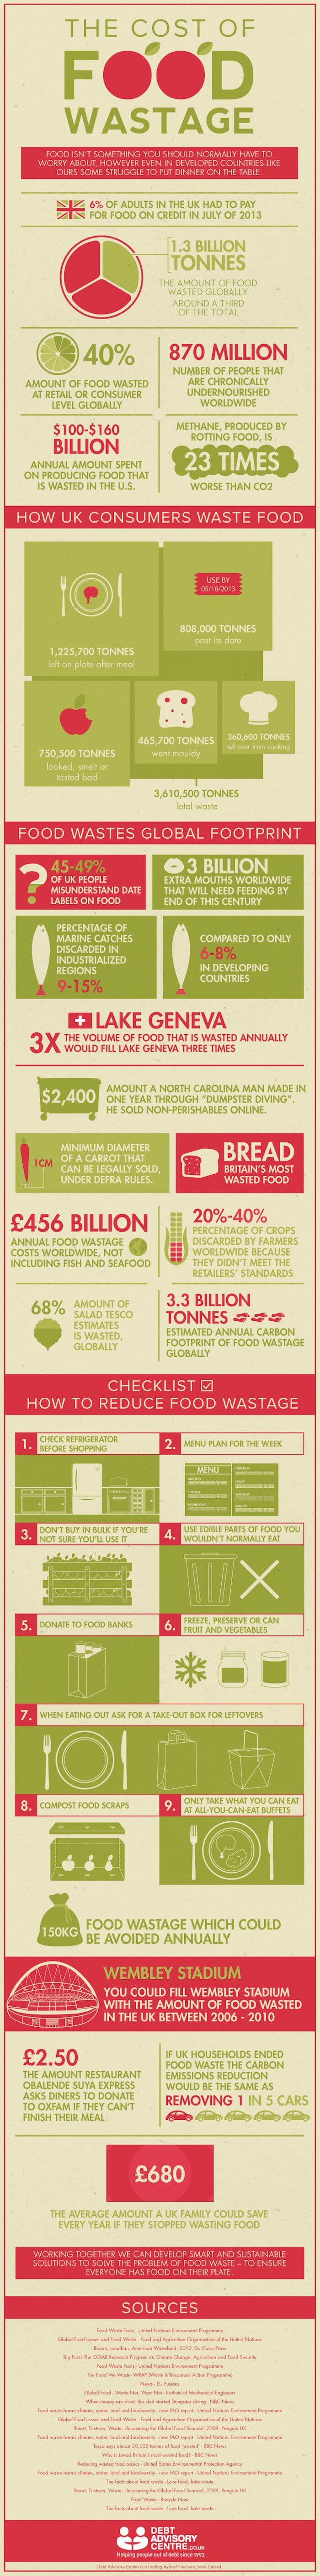 The cost of food wastage infographic